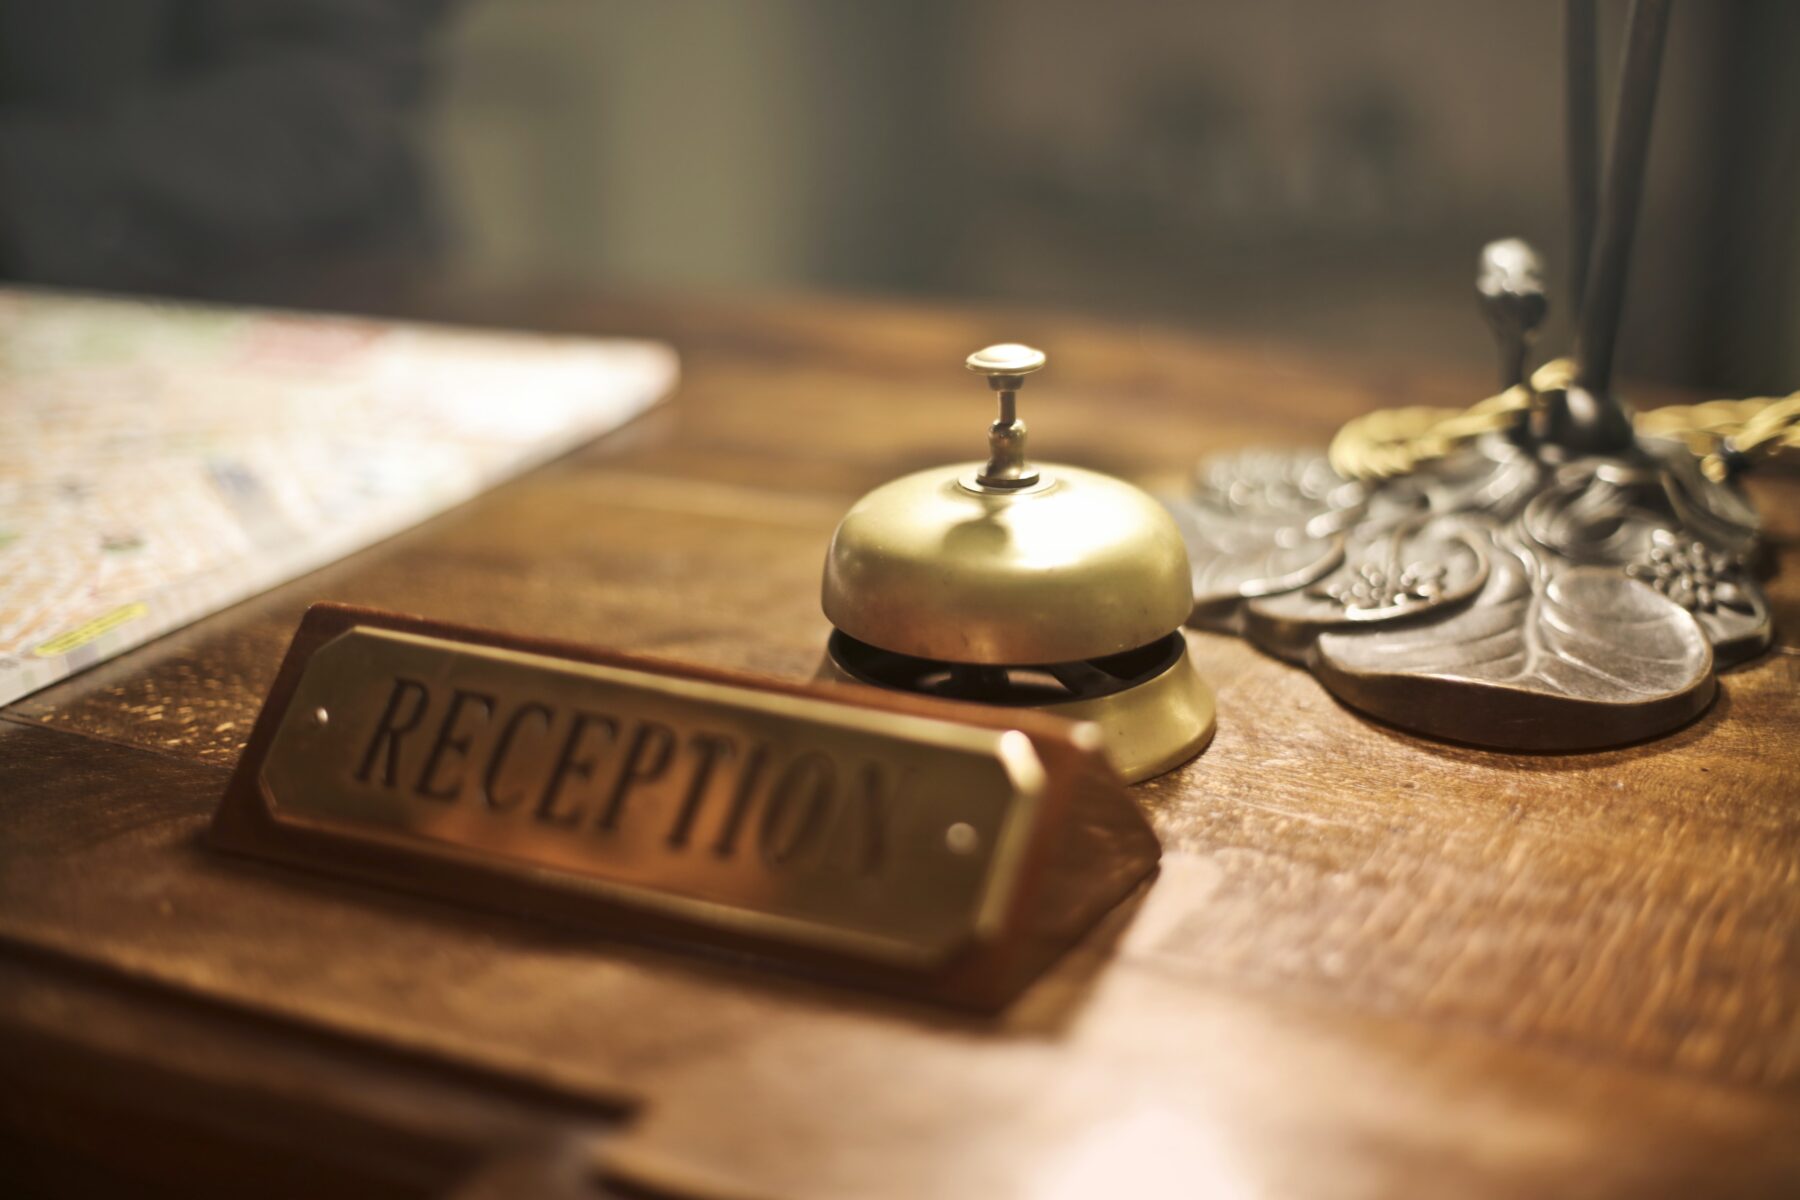  A bell on the receptionist's desk. 
